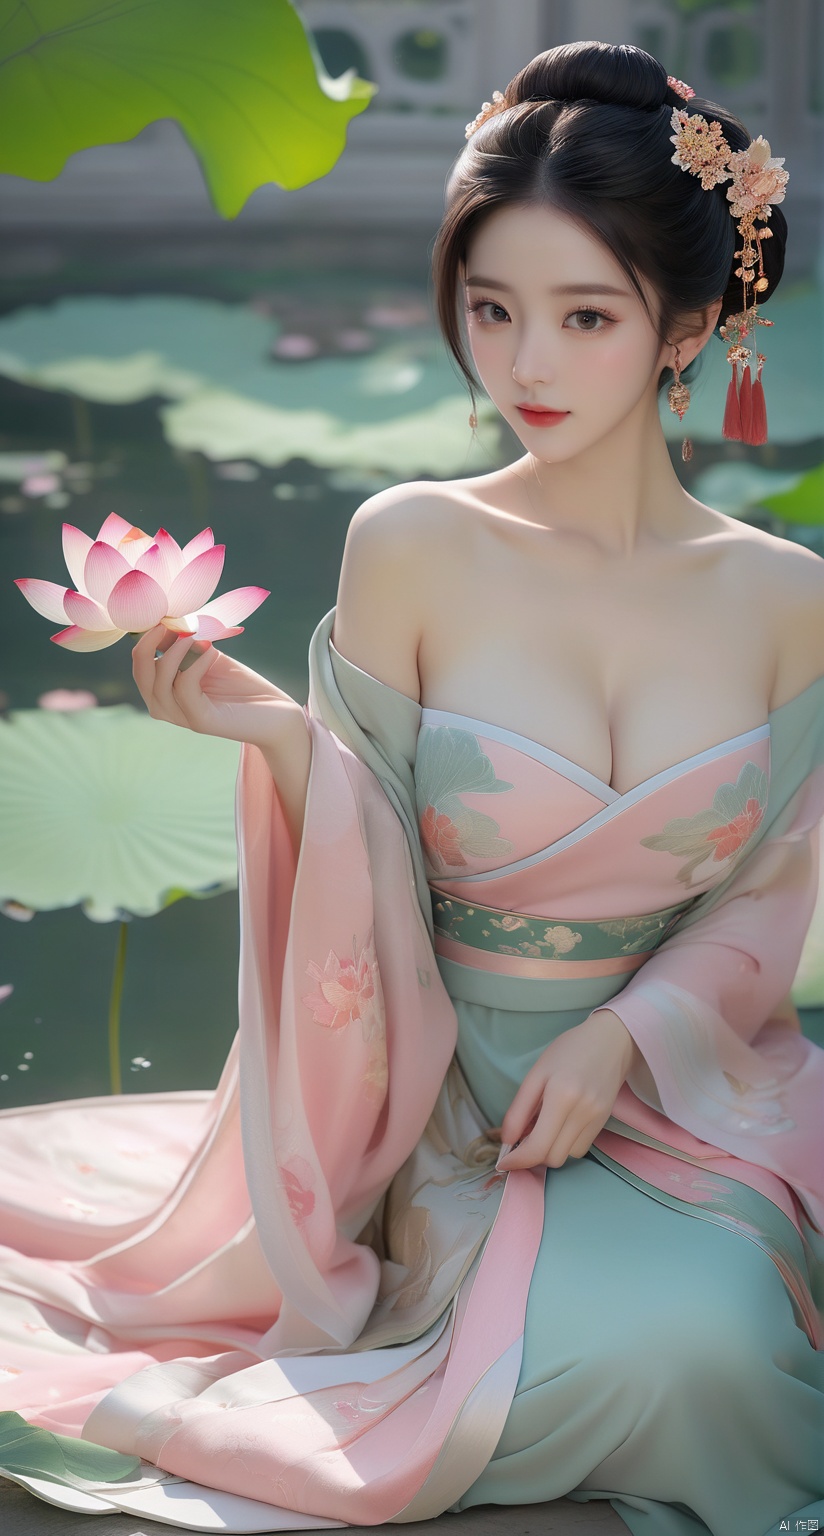  Best quality, Realistic, photorealistic, masterpiece, extremely detailed CG unity 8k wallpaper, best illumination, best shadow, huge filesize ,(huge breasts:2) incredibly absurdres, absurdres, looking at viewer, transparent, smog, gauze, vase, petals, room, ancient Chinese style, detailed background, wide shot background,
(((1gilr,black hair))),(Sitting on the lotus pond porch:1.39) ,(huge breasts:2.1),(A pond full of pink lotus flowers:1.3),close up of 1girl,Hairpins,hair ornament,hair wings,slim,narrow waist,(huge breasts:2.3),perfect eyes,beautiful perfect face,pleasant smile,perfect female figure,detailed skin,charming,alluring,seductive,erotic,enchanting,delicate pattern,detailed complex and rich exquisite clothing detail,delicate intricate fabrics,
Morning Serenade In the gentle morning glow, (a woman in a pink lotus-patterned Hanfu stands in an indoor courtyard:1.26),(Chinese traditional dragon and phoenix embroidered Hanfu:1.3), admiring the tranquil garden scenery. The lotus-patterned Hanfu, embellished with silver-thread embroidery, is softly illuminated by the morning light. The light mint green Hanfu imparts a sense of calm and freshness, adorned with delicate lotus patterns, with a blurred background to enhance the peaceful atmosphere,(huge breasts:2.3), puregirl, g009